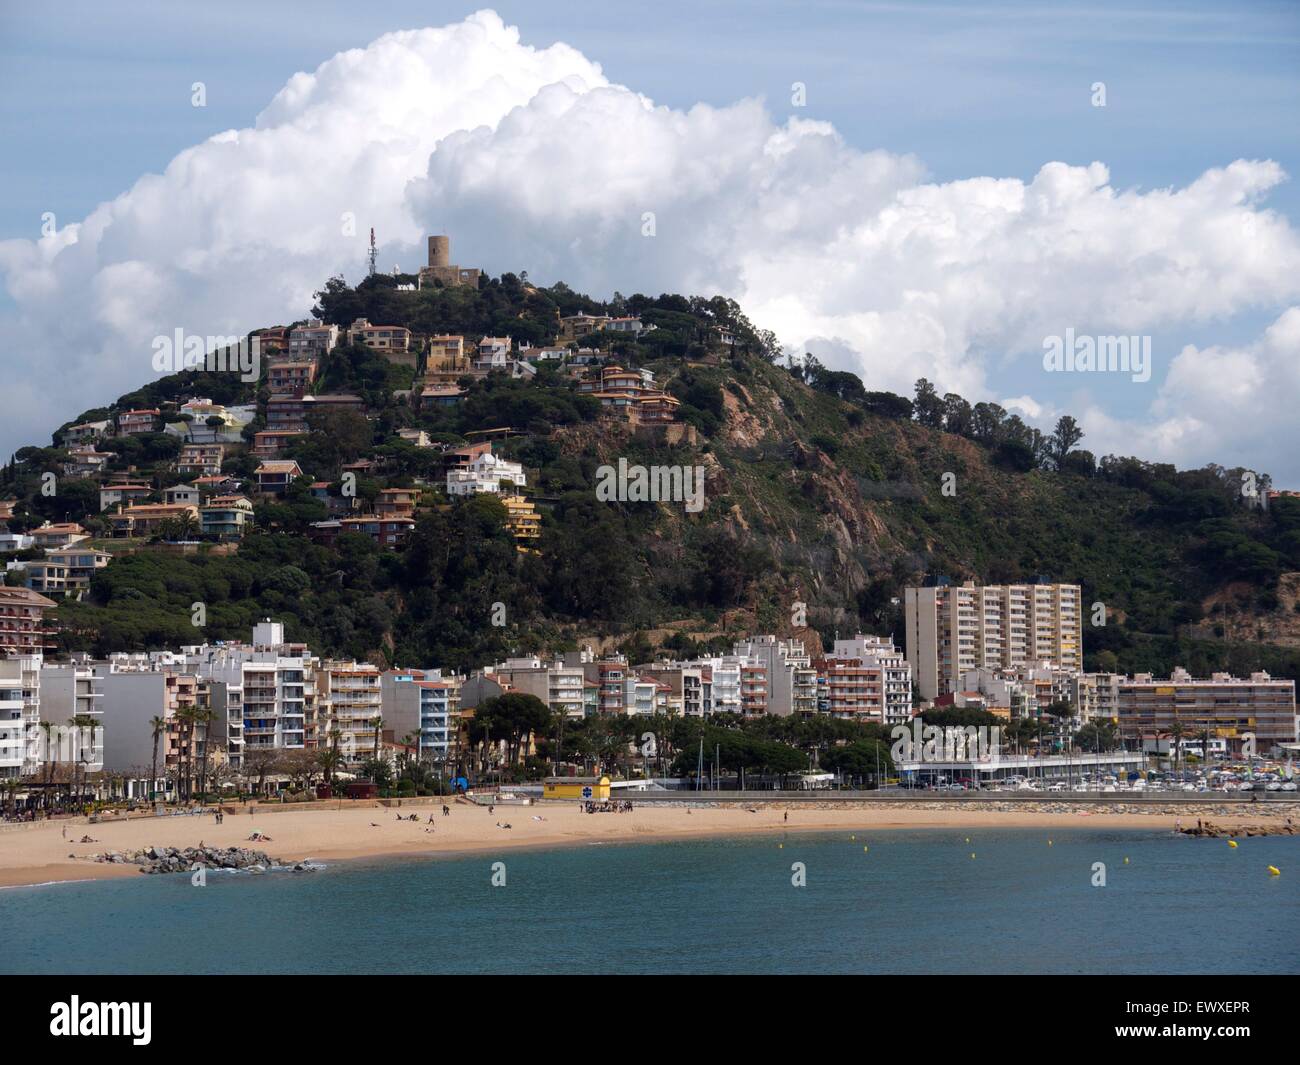 Beach resort and surround hill, clouds slowly creeping in Stock Photo